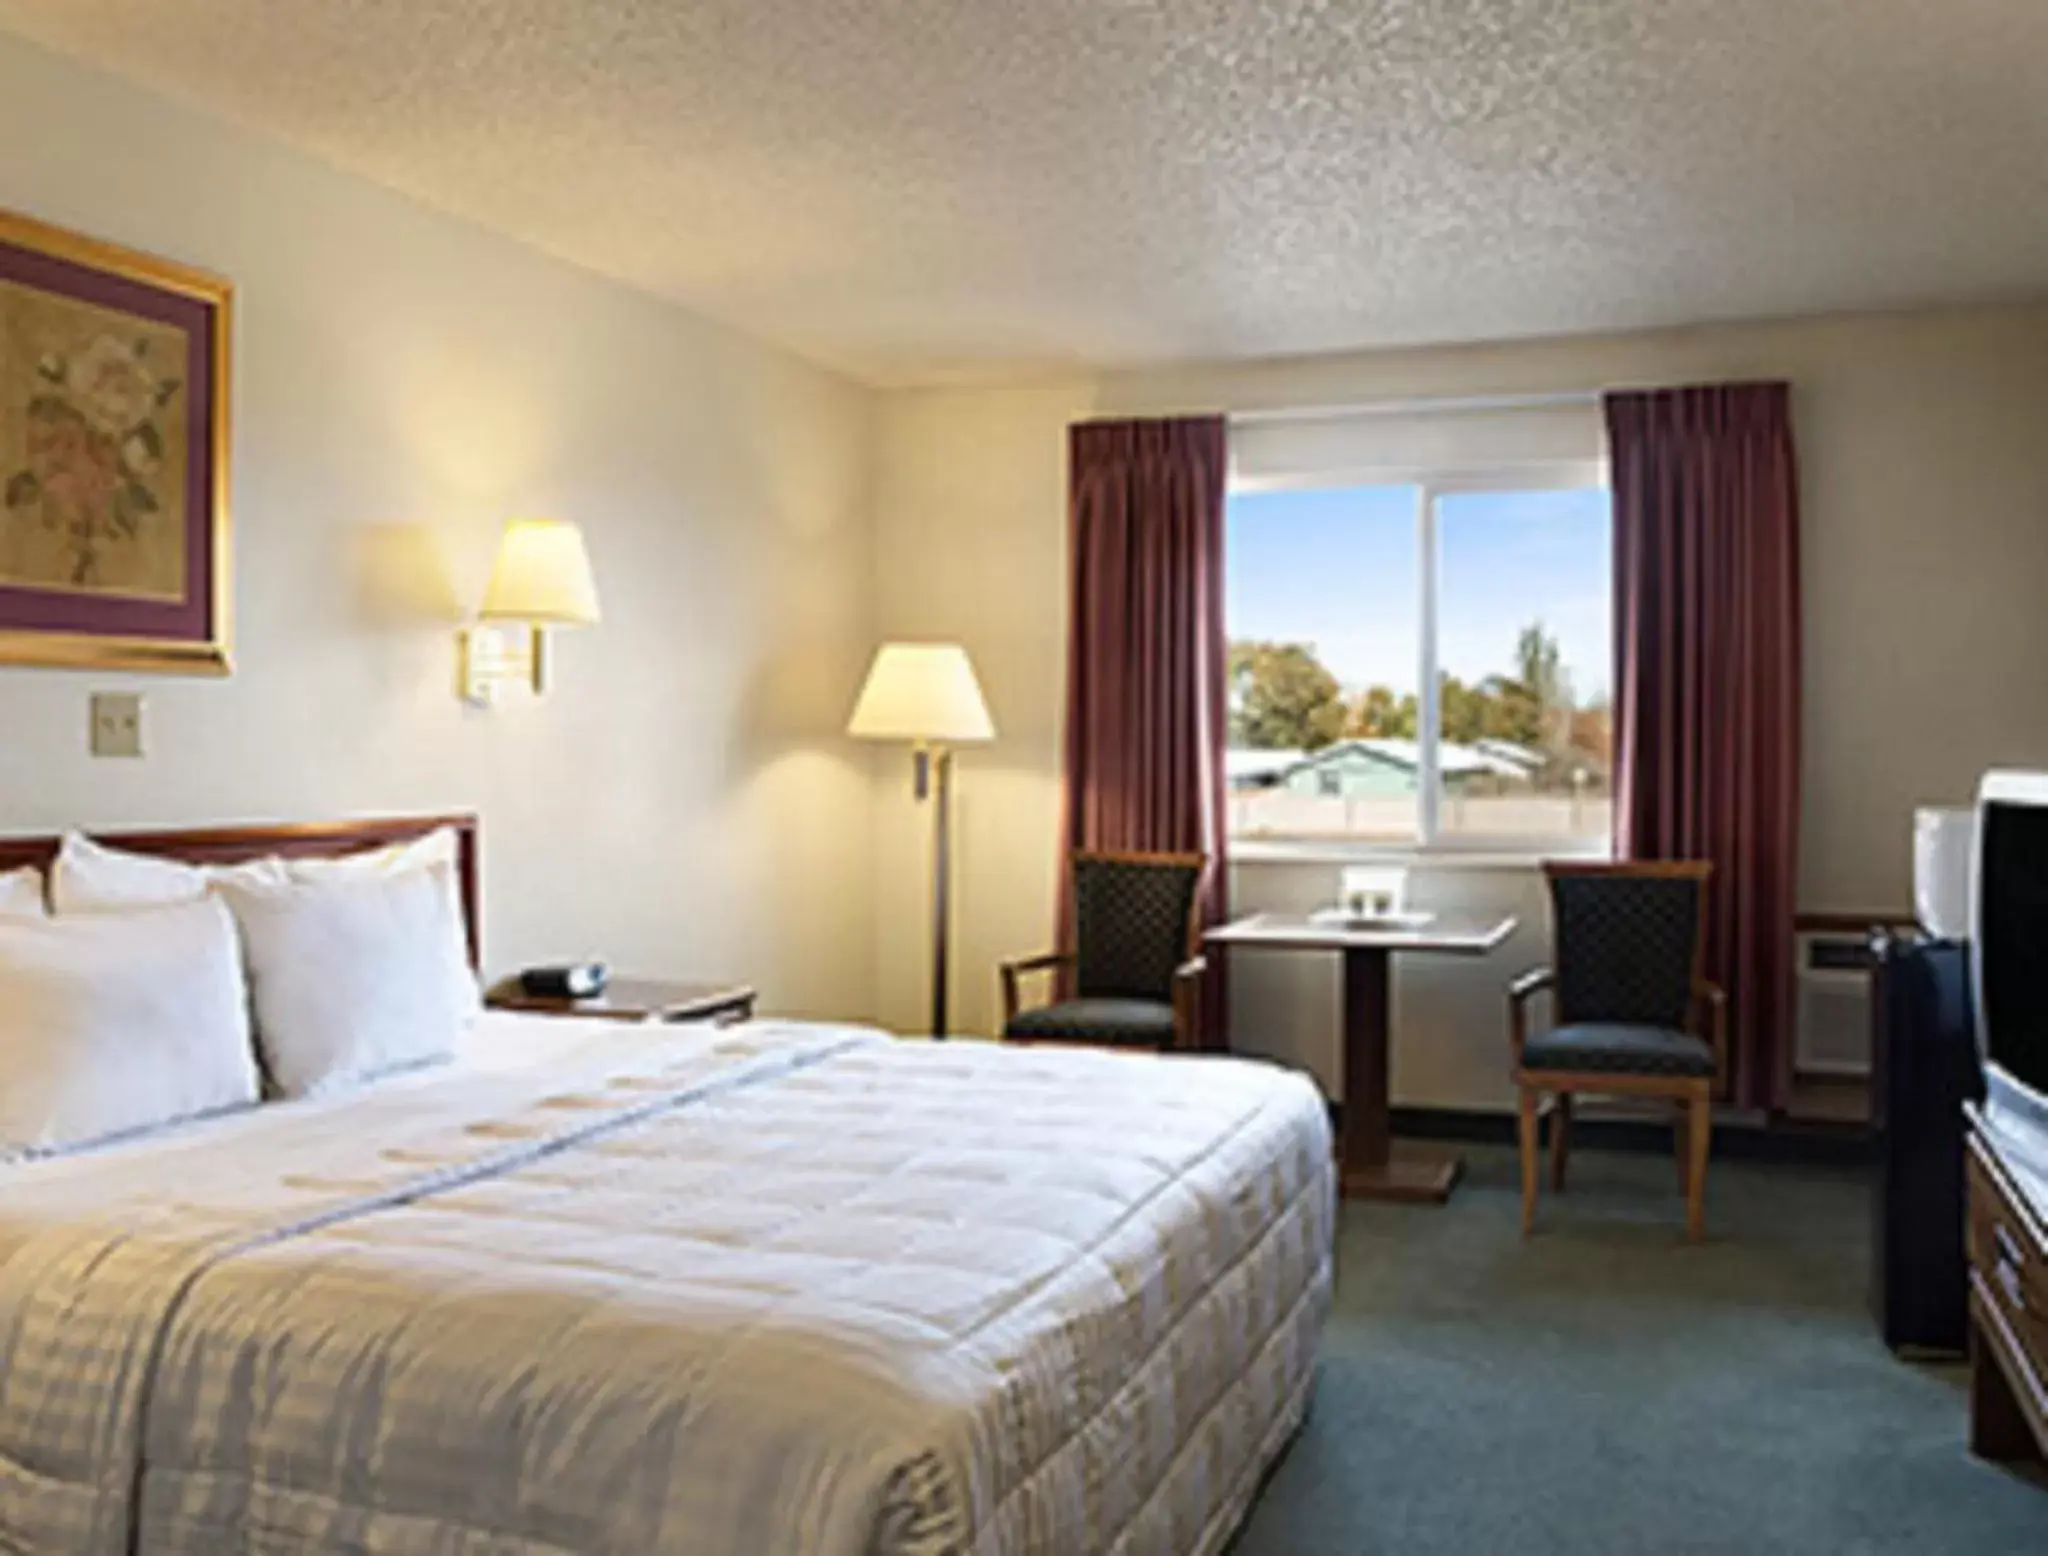 Fitness centre/facilities, Room Photo in Days Inn by Wyndham Alamosa